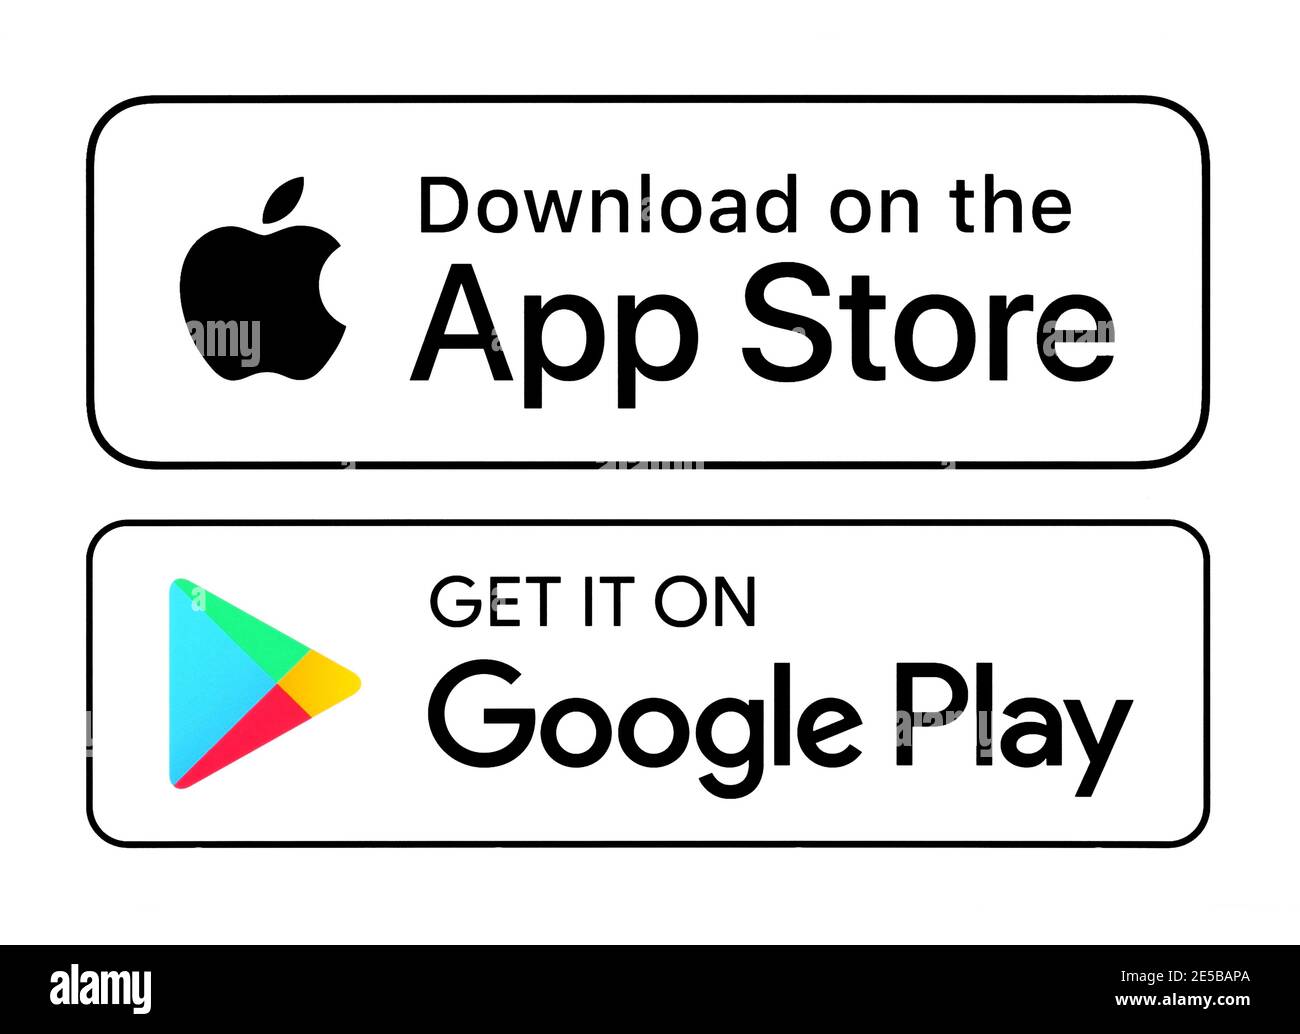 Download playstore Download the